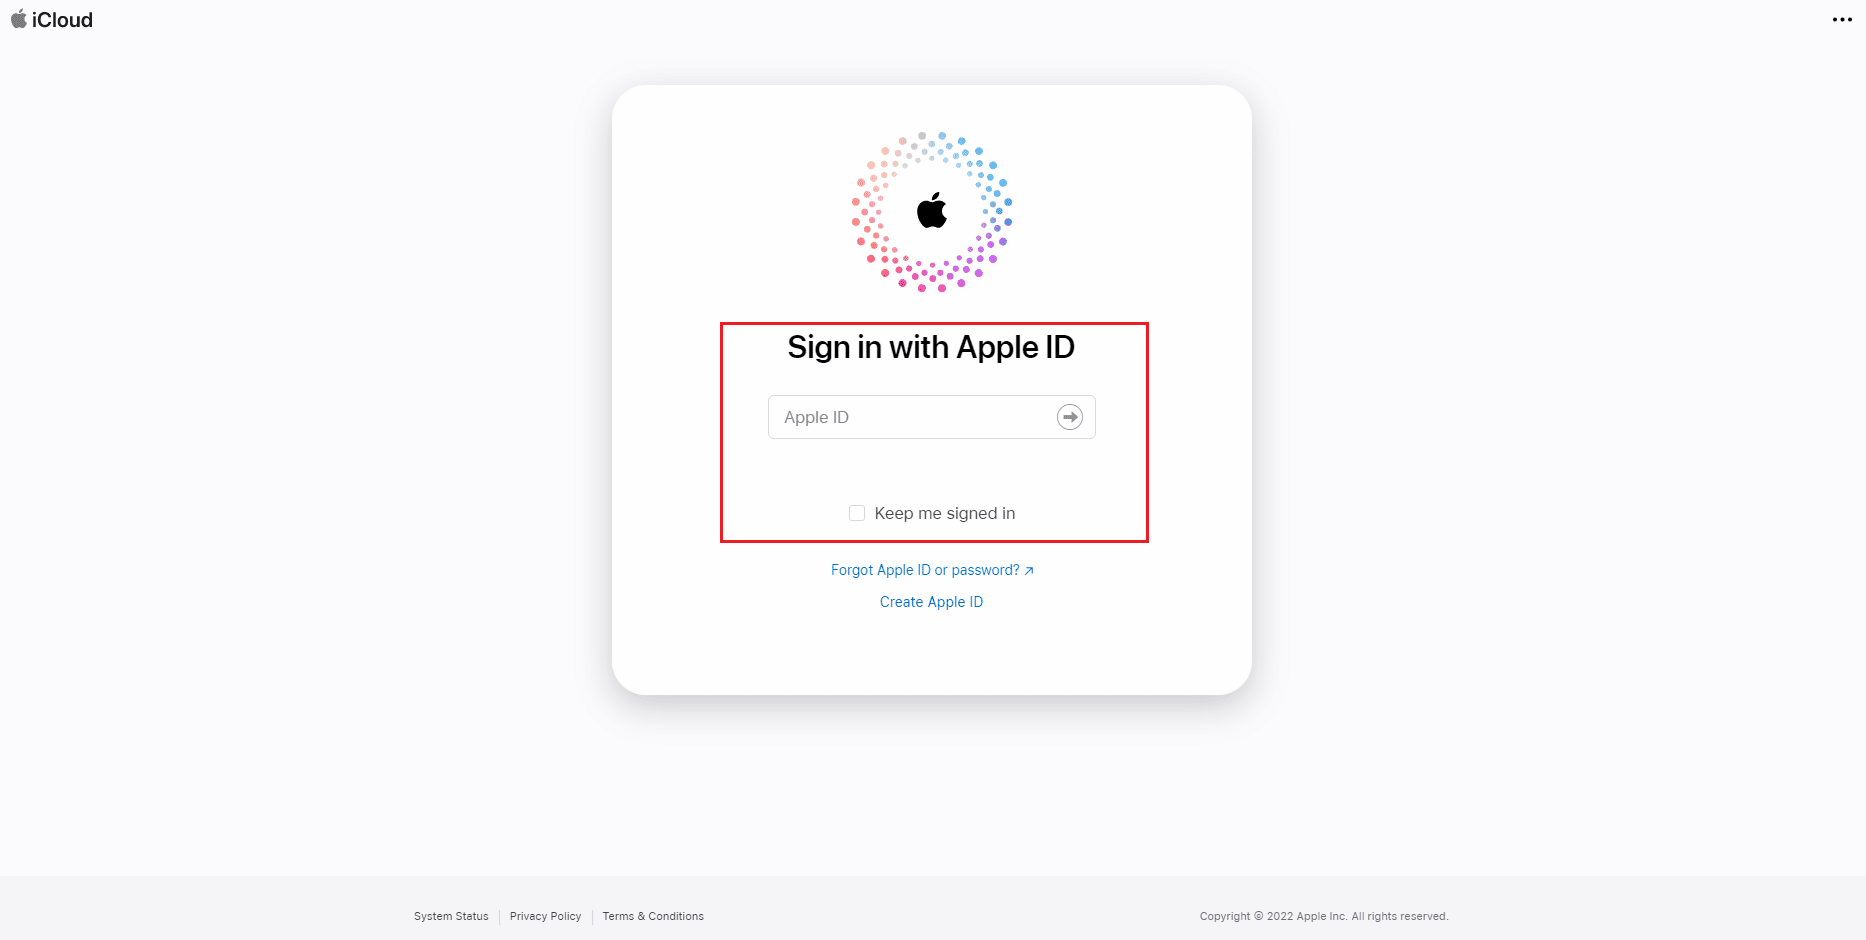 sign in with apple ID